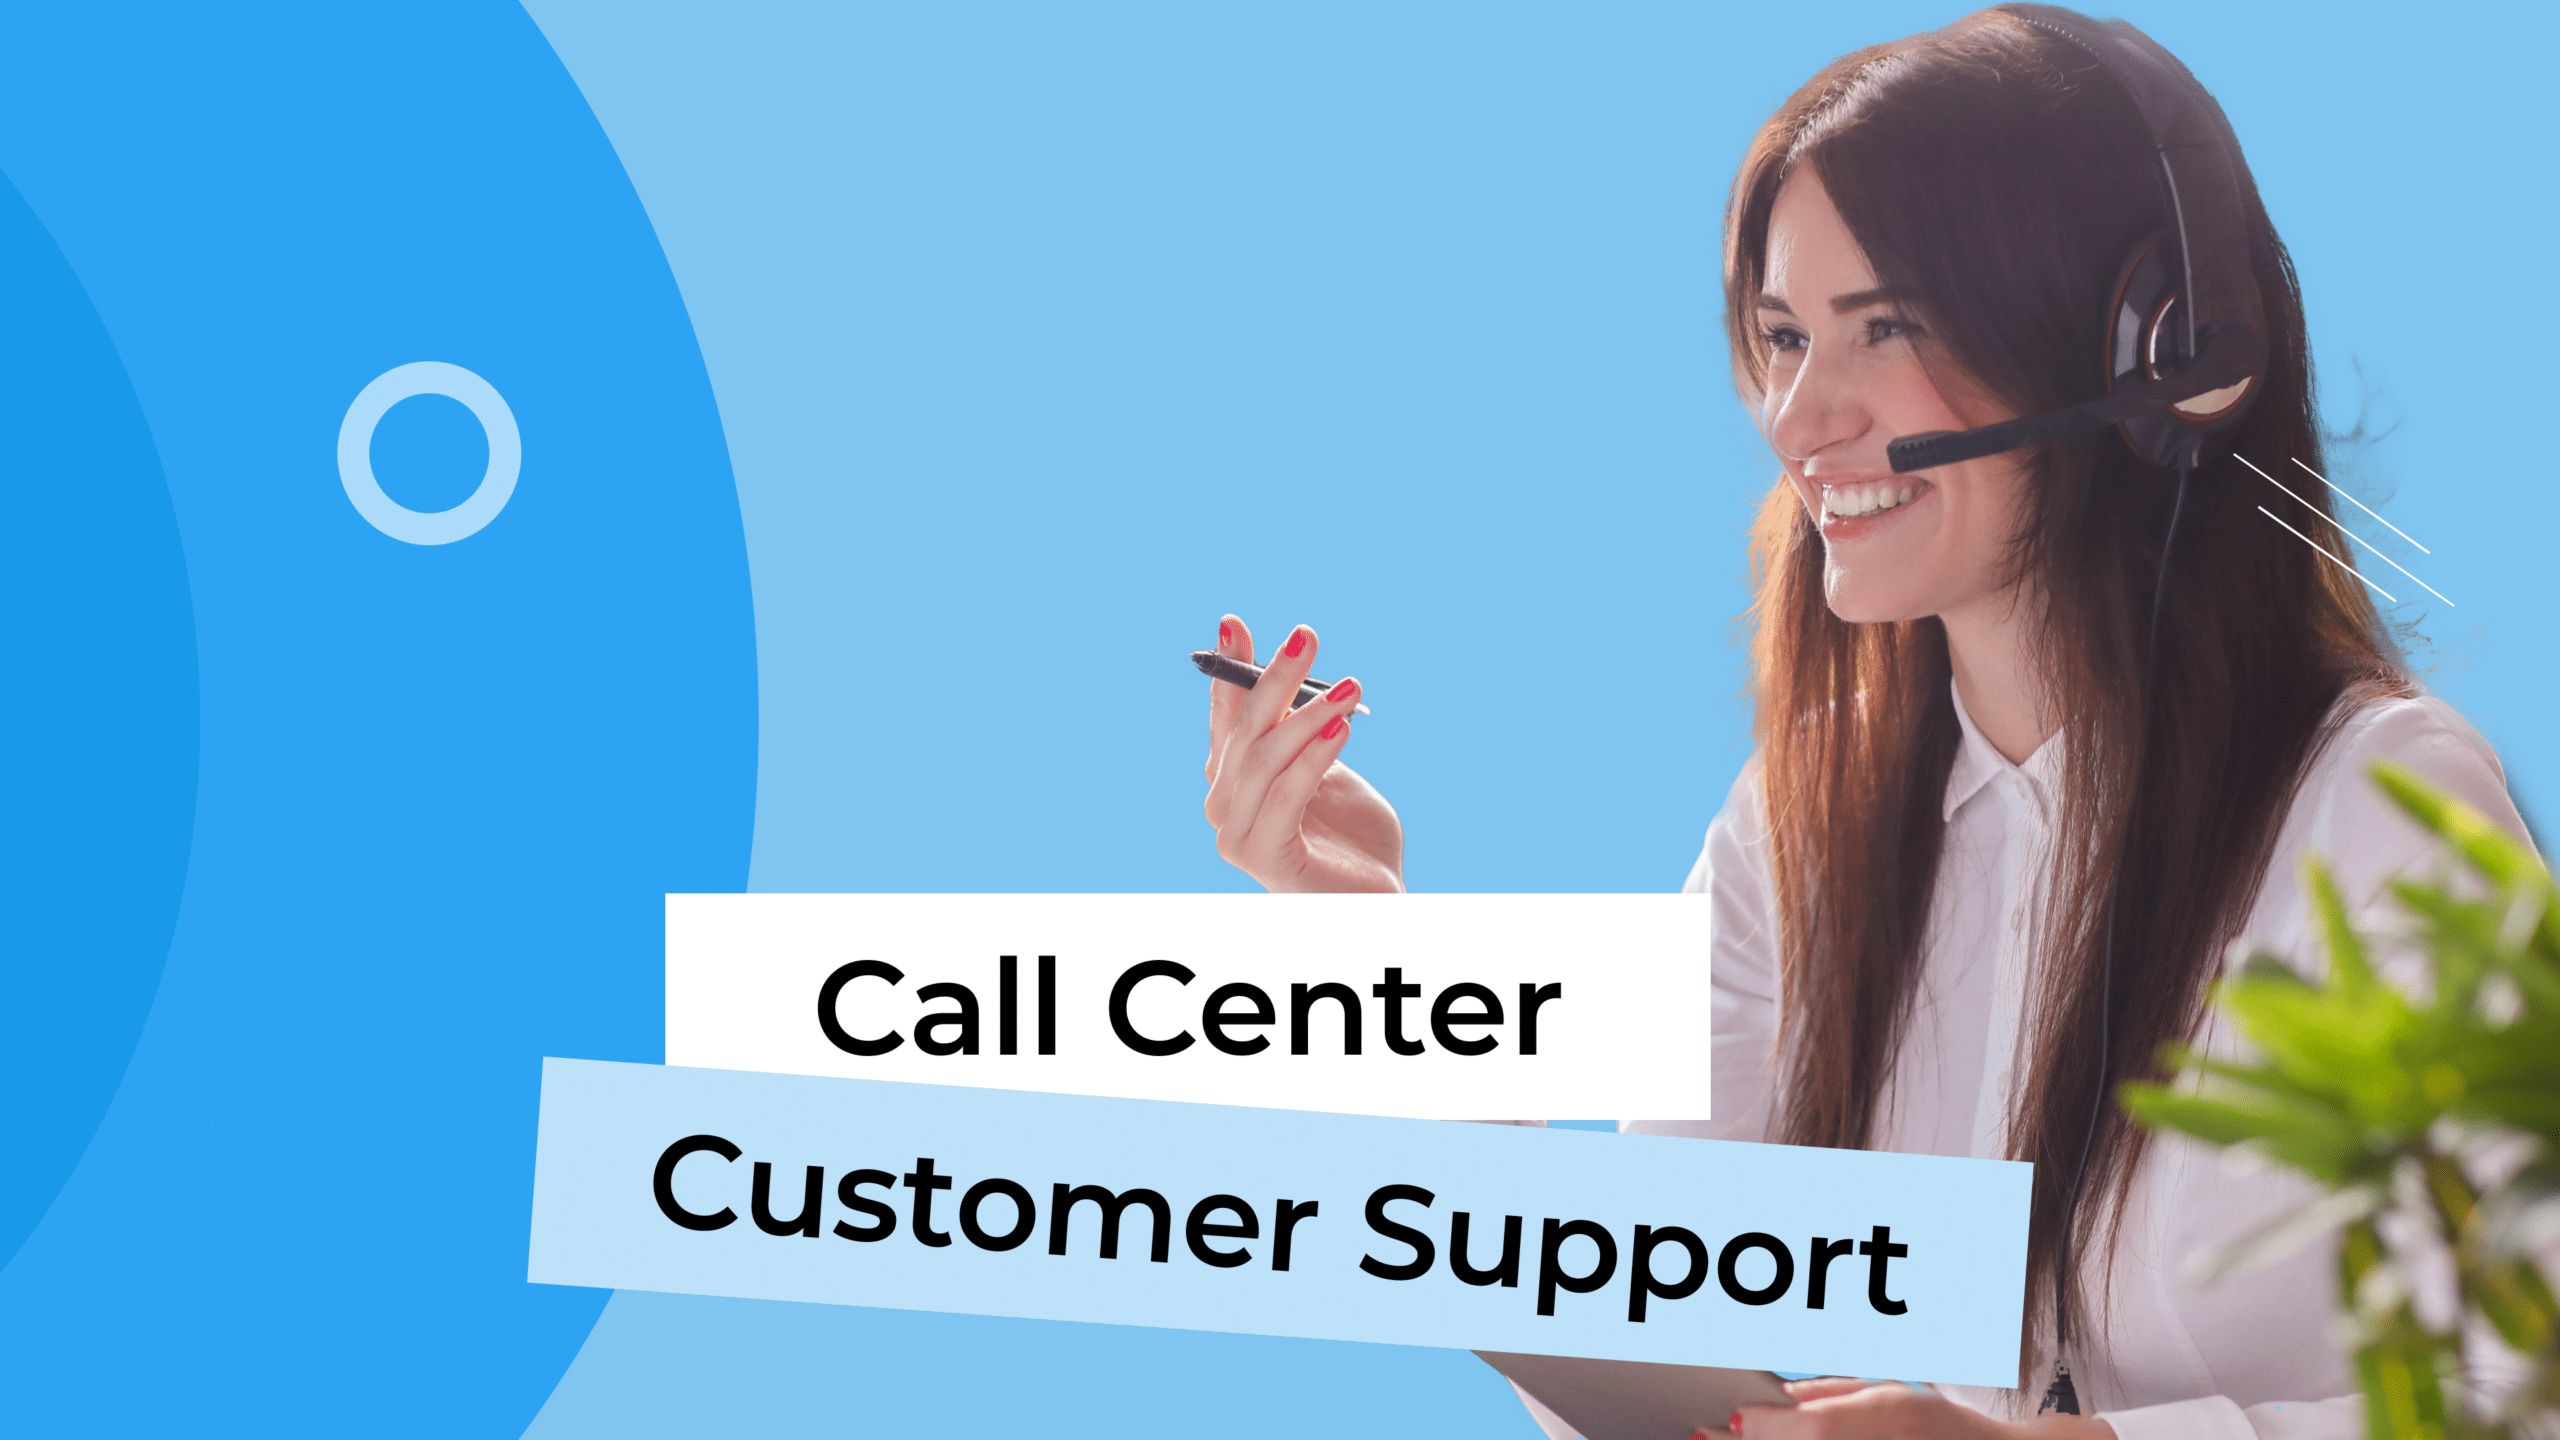 Optimizing Call Center Customer Support For Increased Revenue